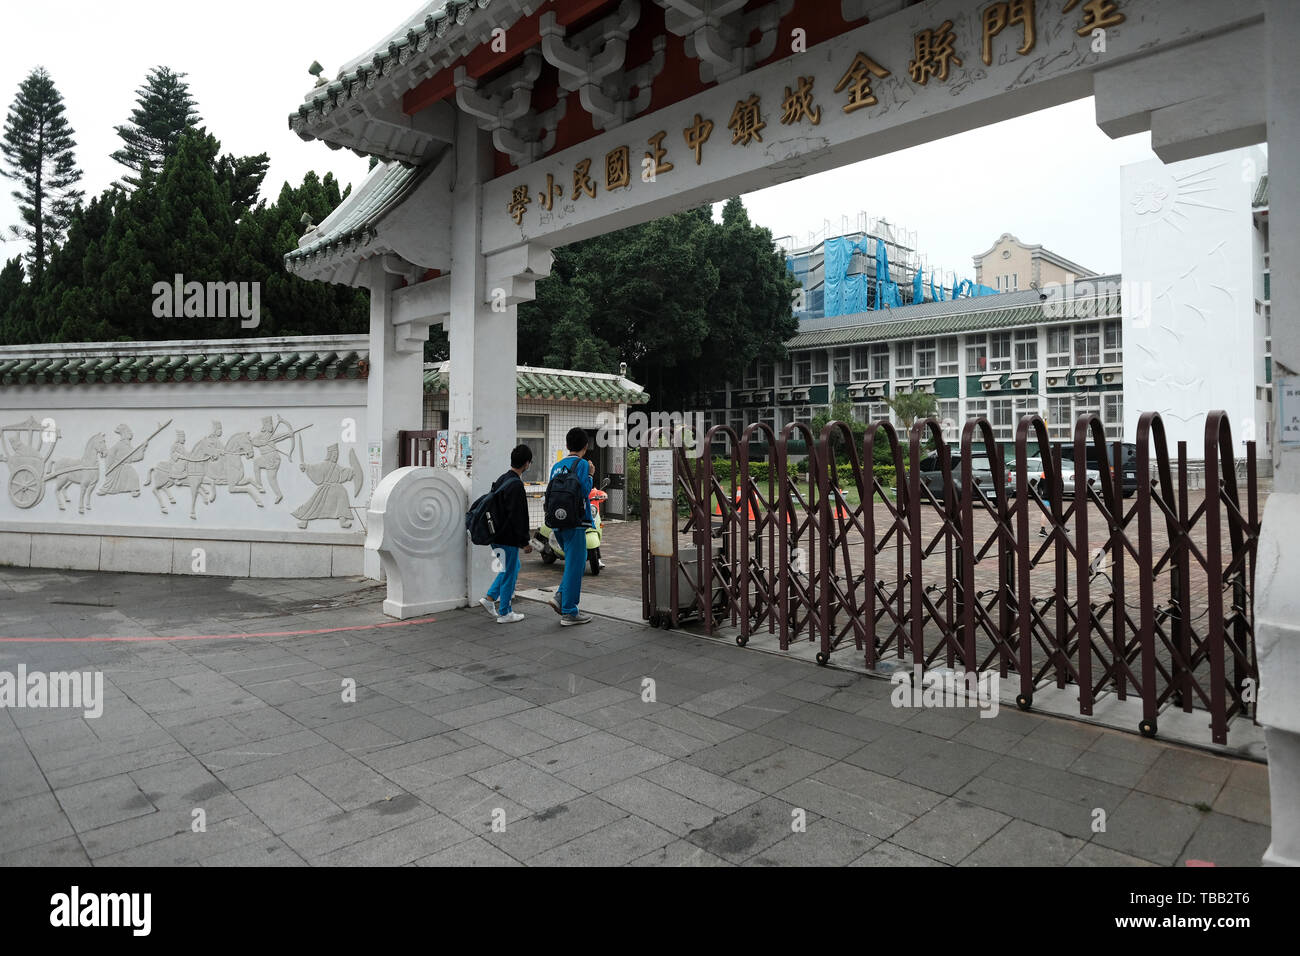 Students entering Wujiang Academy founded in 1780 in Kinmen island Taiwan. ZhuZi was a famous rationalist in Confucian philosophy from Southern Song Dynasty who founded the earliest Yennan Academy in Kinmen where students were able to receive education. Stock Photo